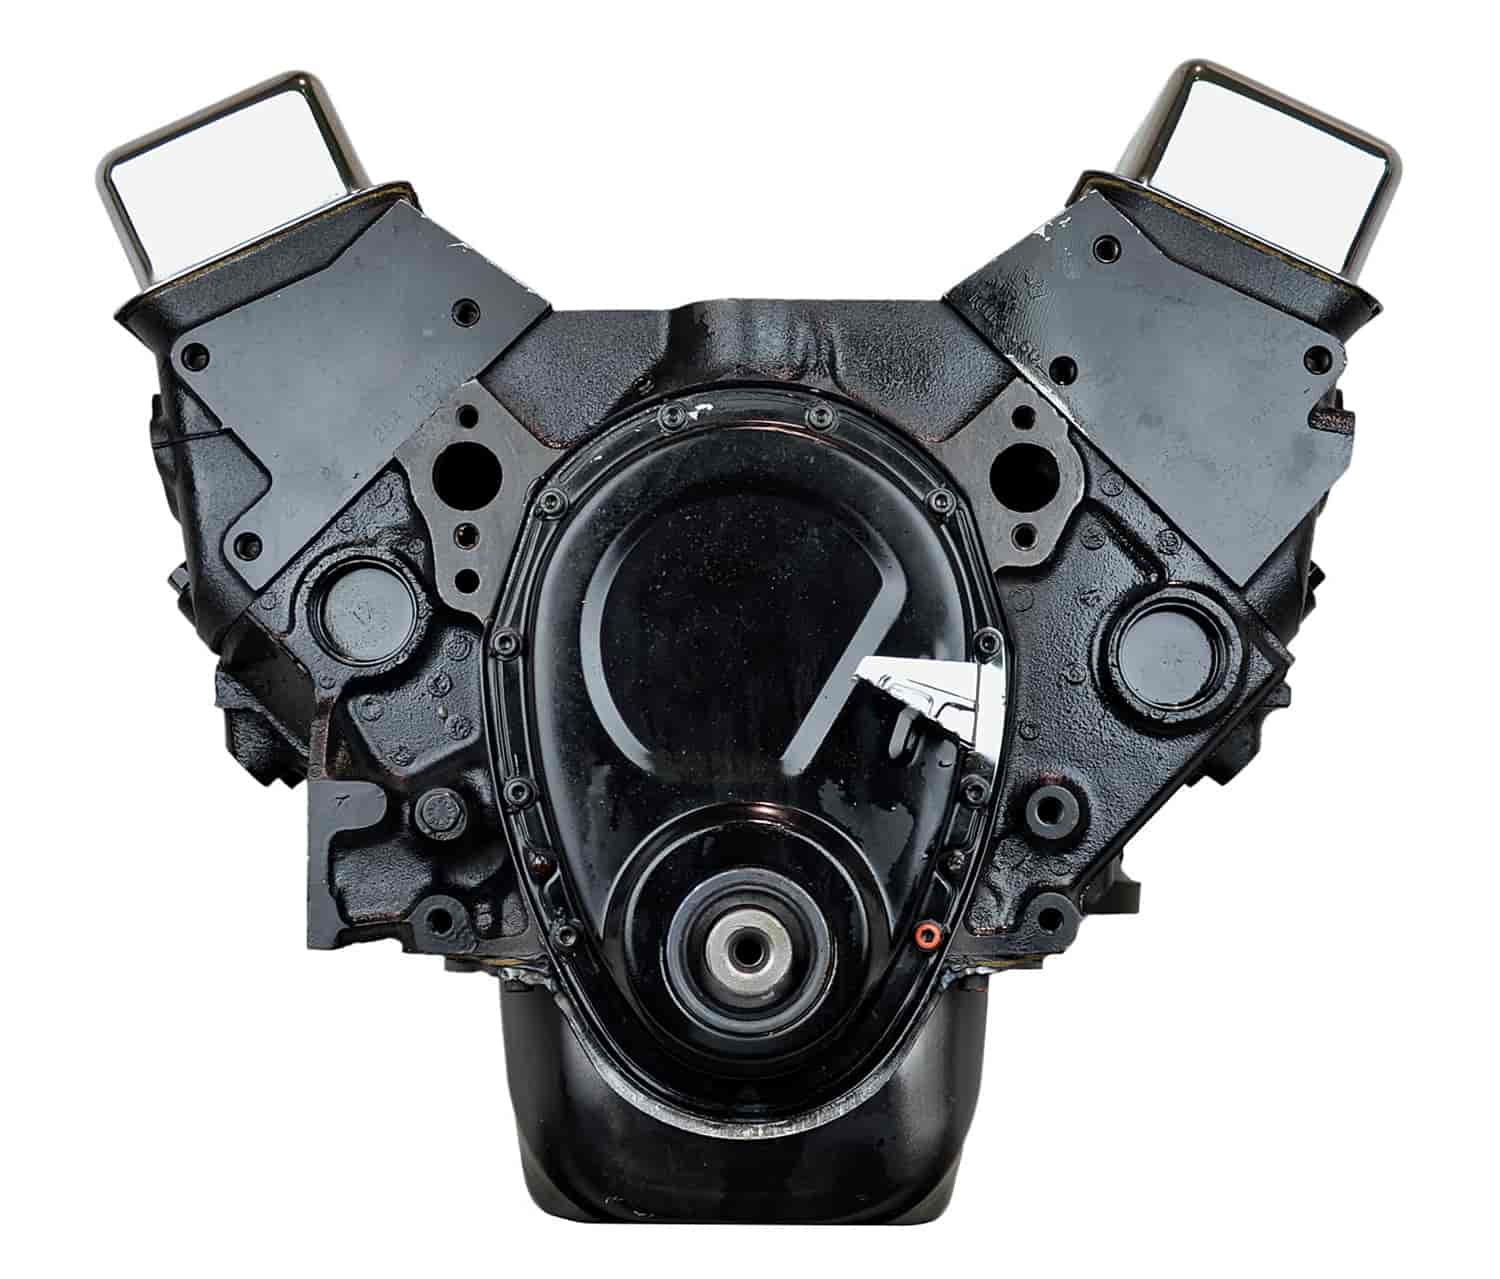 Remanufactured Crate Engine for 1978-1985 Chevy & GMC C/K Truck, SUV, Car & G/P Van with 350ci/5.7L V8